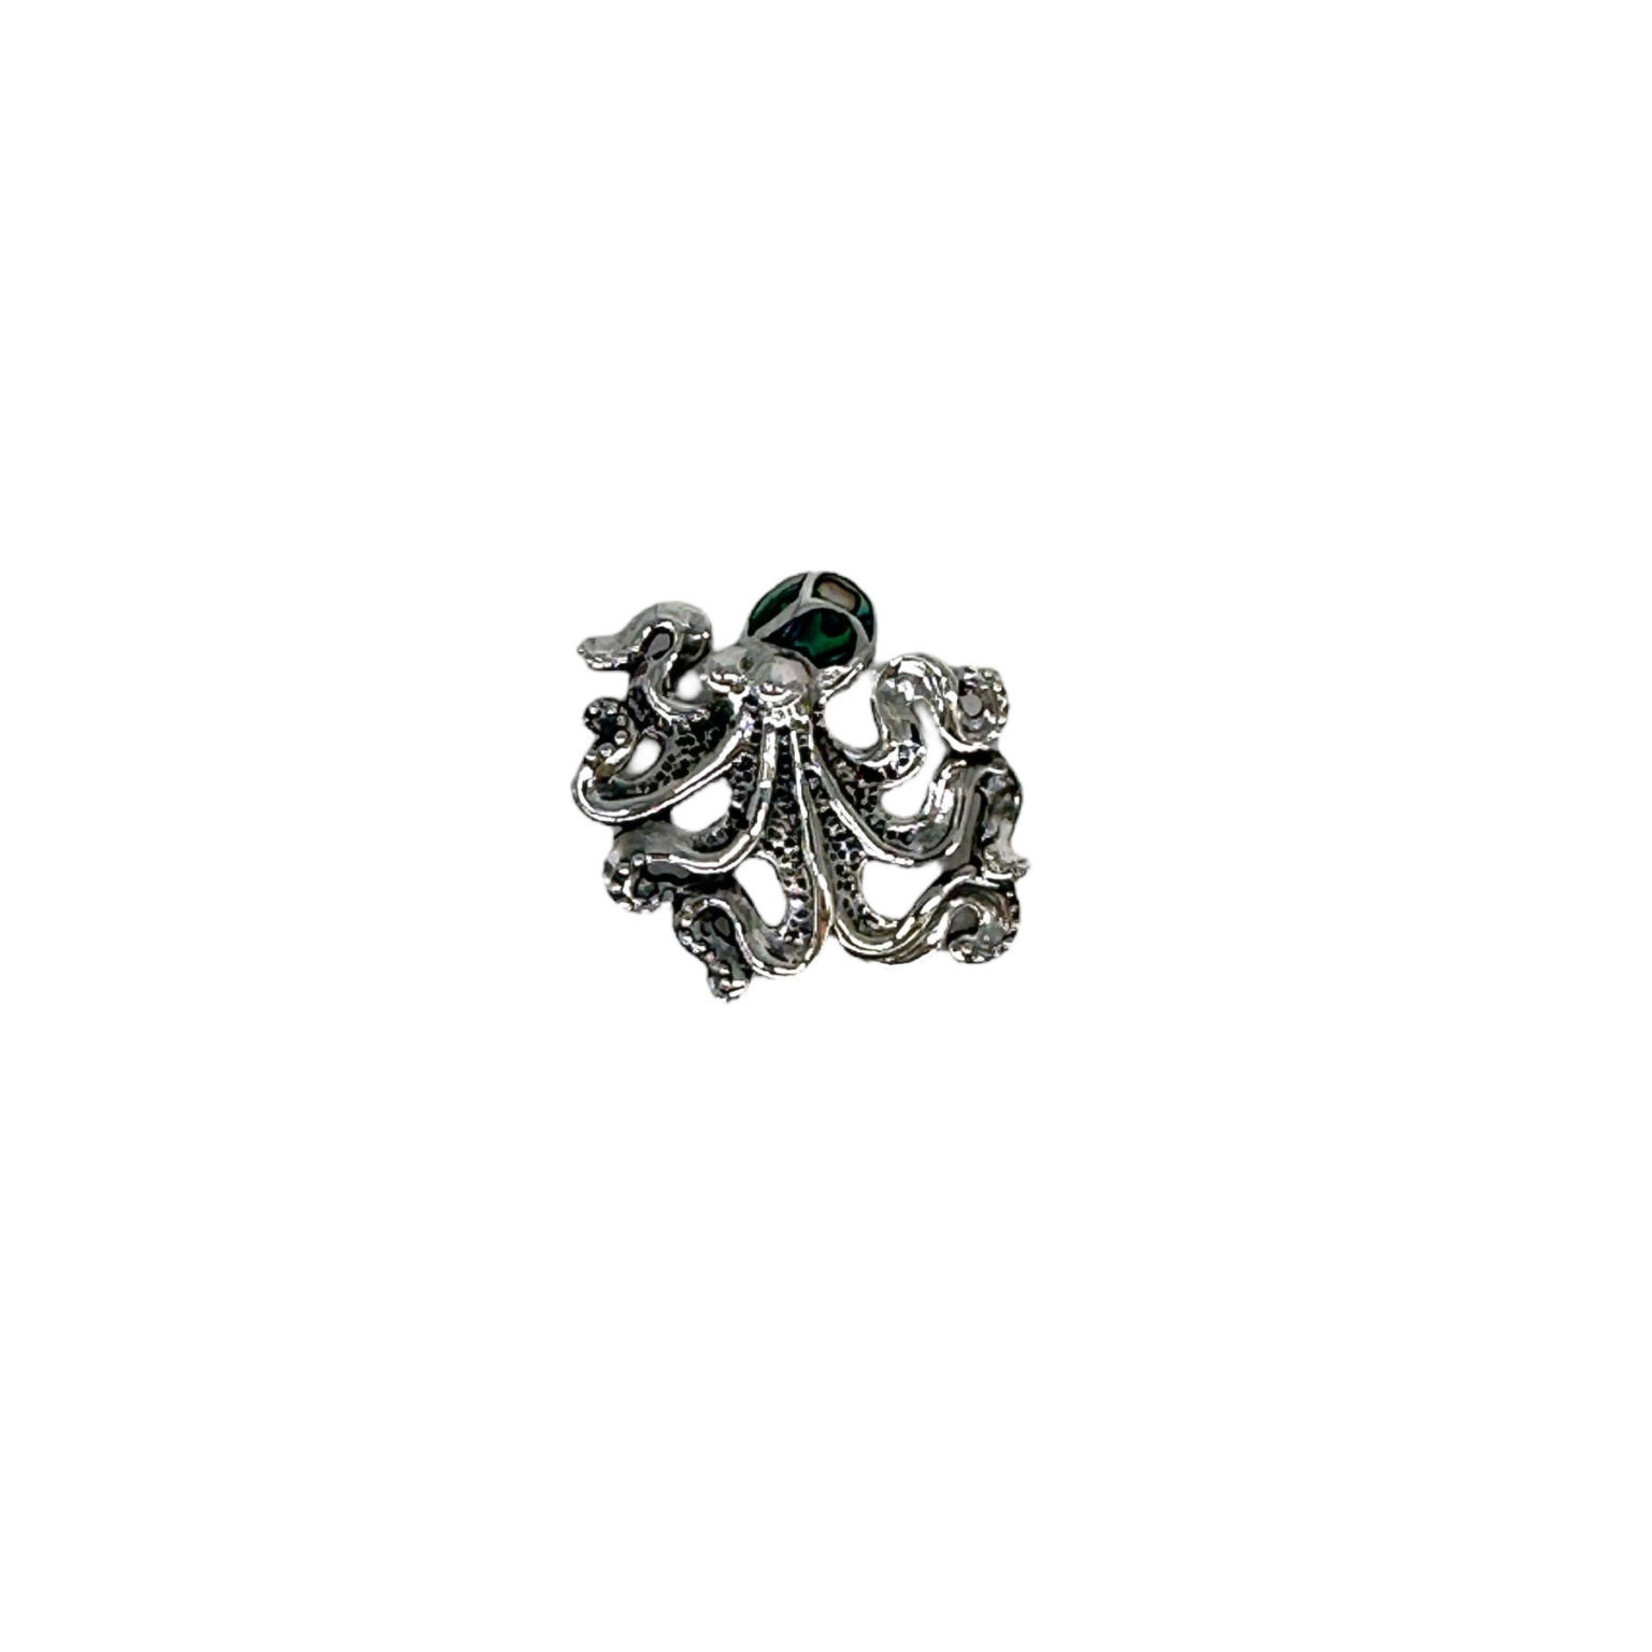 P377 Sterling Silver and Paua Octopus Pendant with Filigree Detail